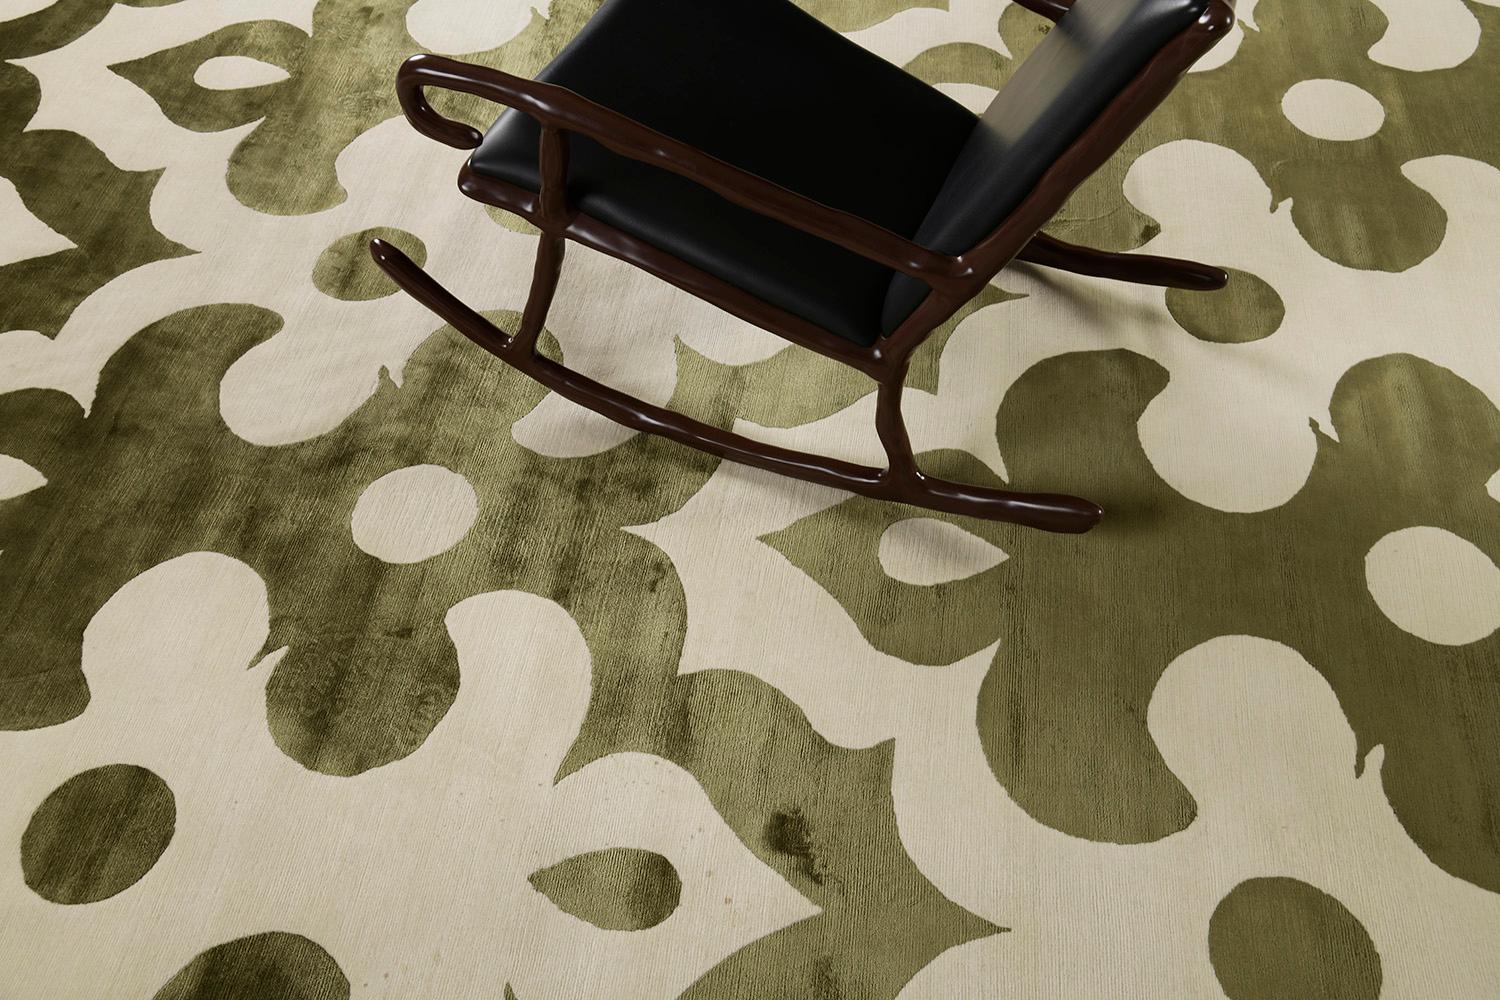 Moresco' features a stunning embossed all over pattern that brings satisfying texture to the entirety of this mesmerizing rug. Muted tones of cream and olive green complements the soothing character brought about this exquisite piece. With its